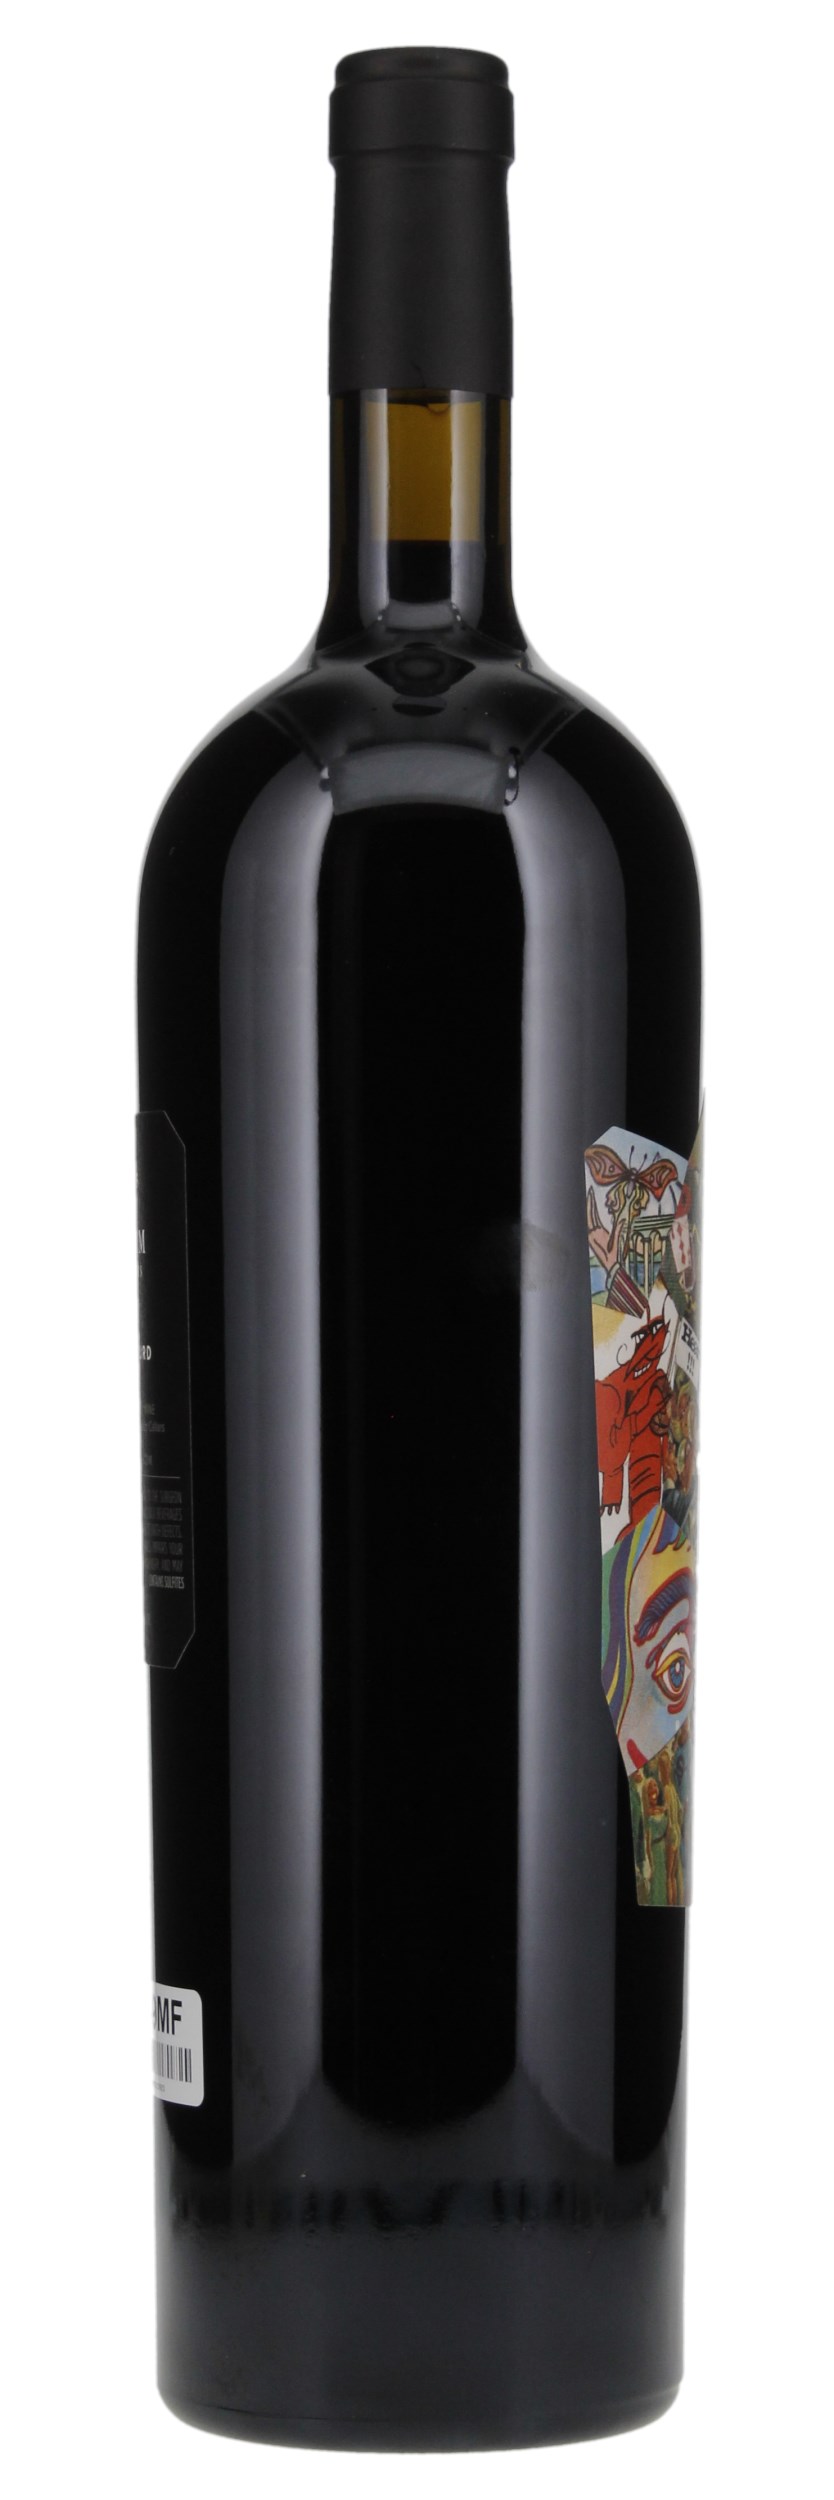 2015 Realm The Absurd, 1.5ltr